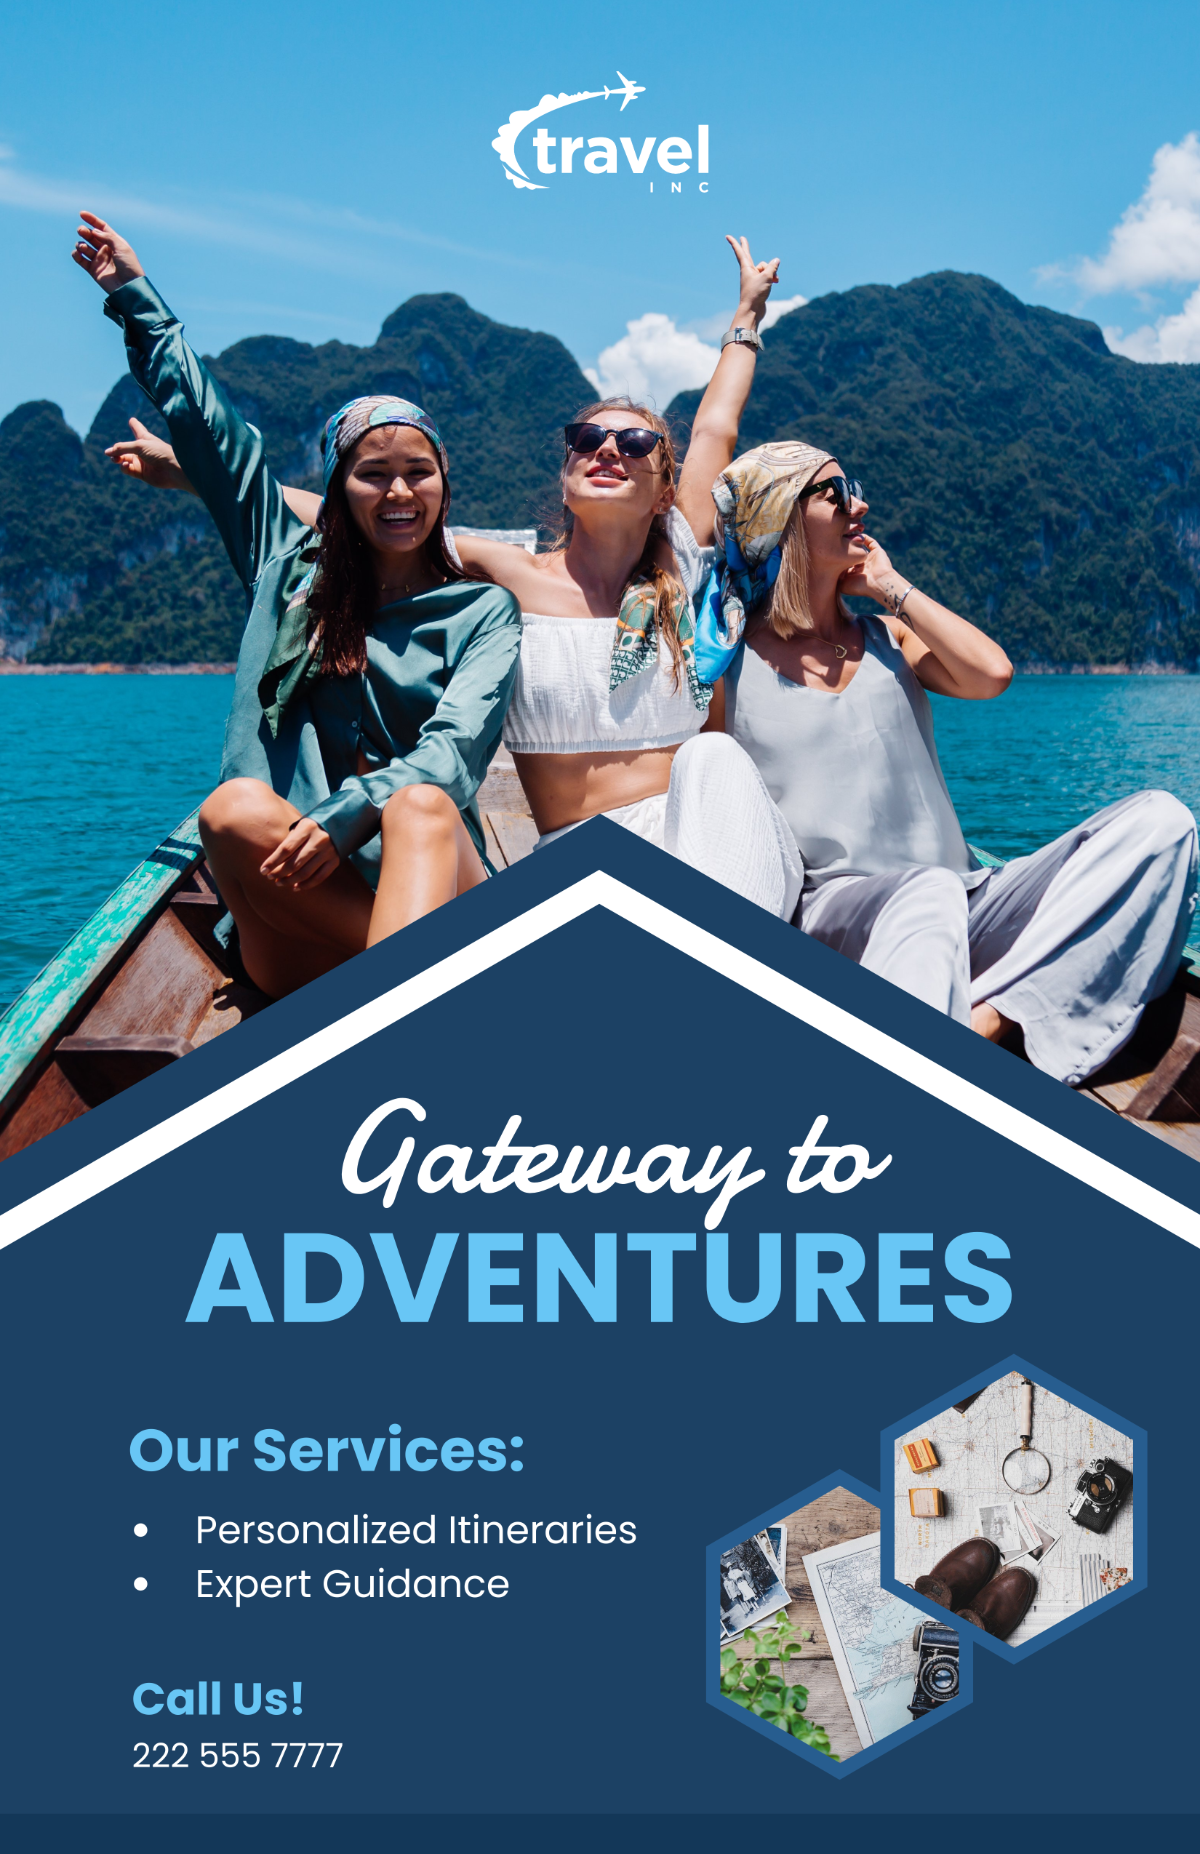 Travel Agency Business Poster Template